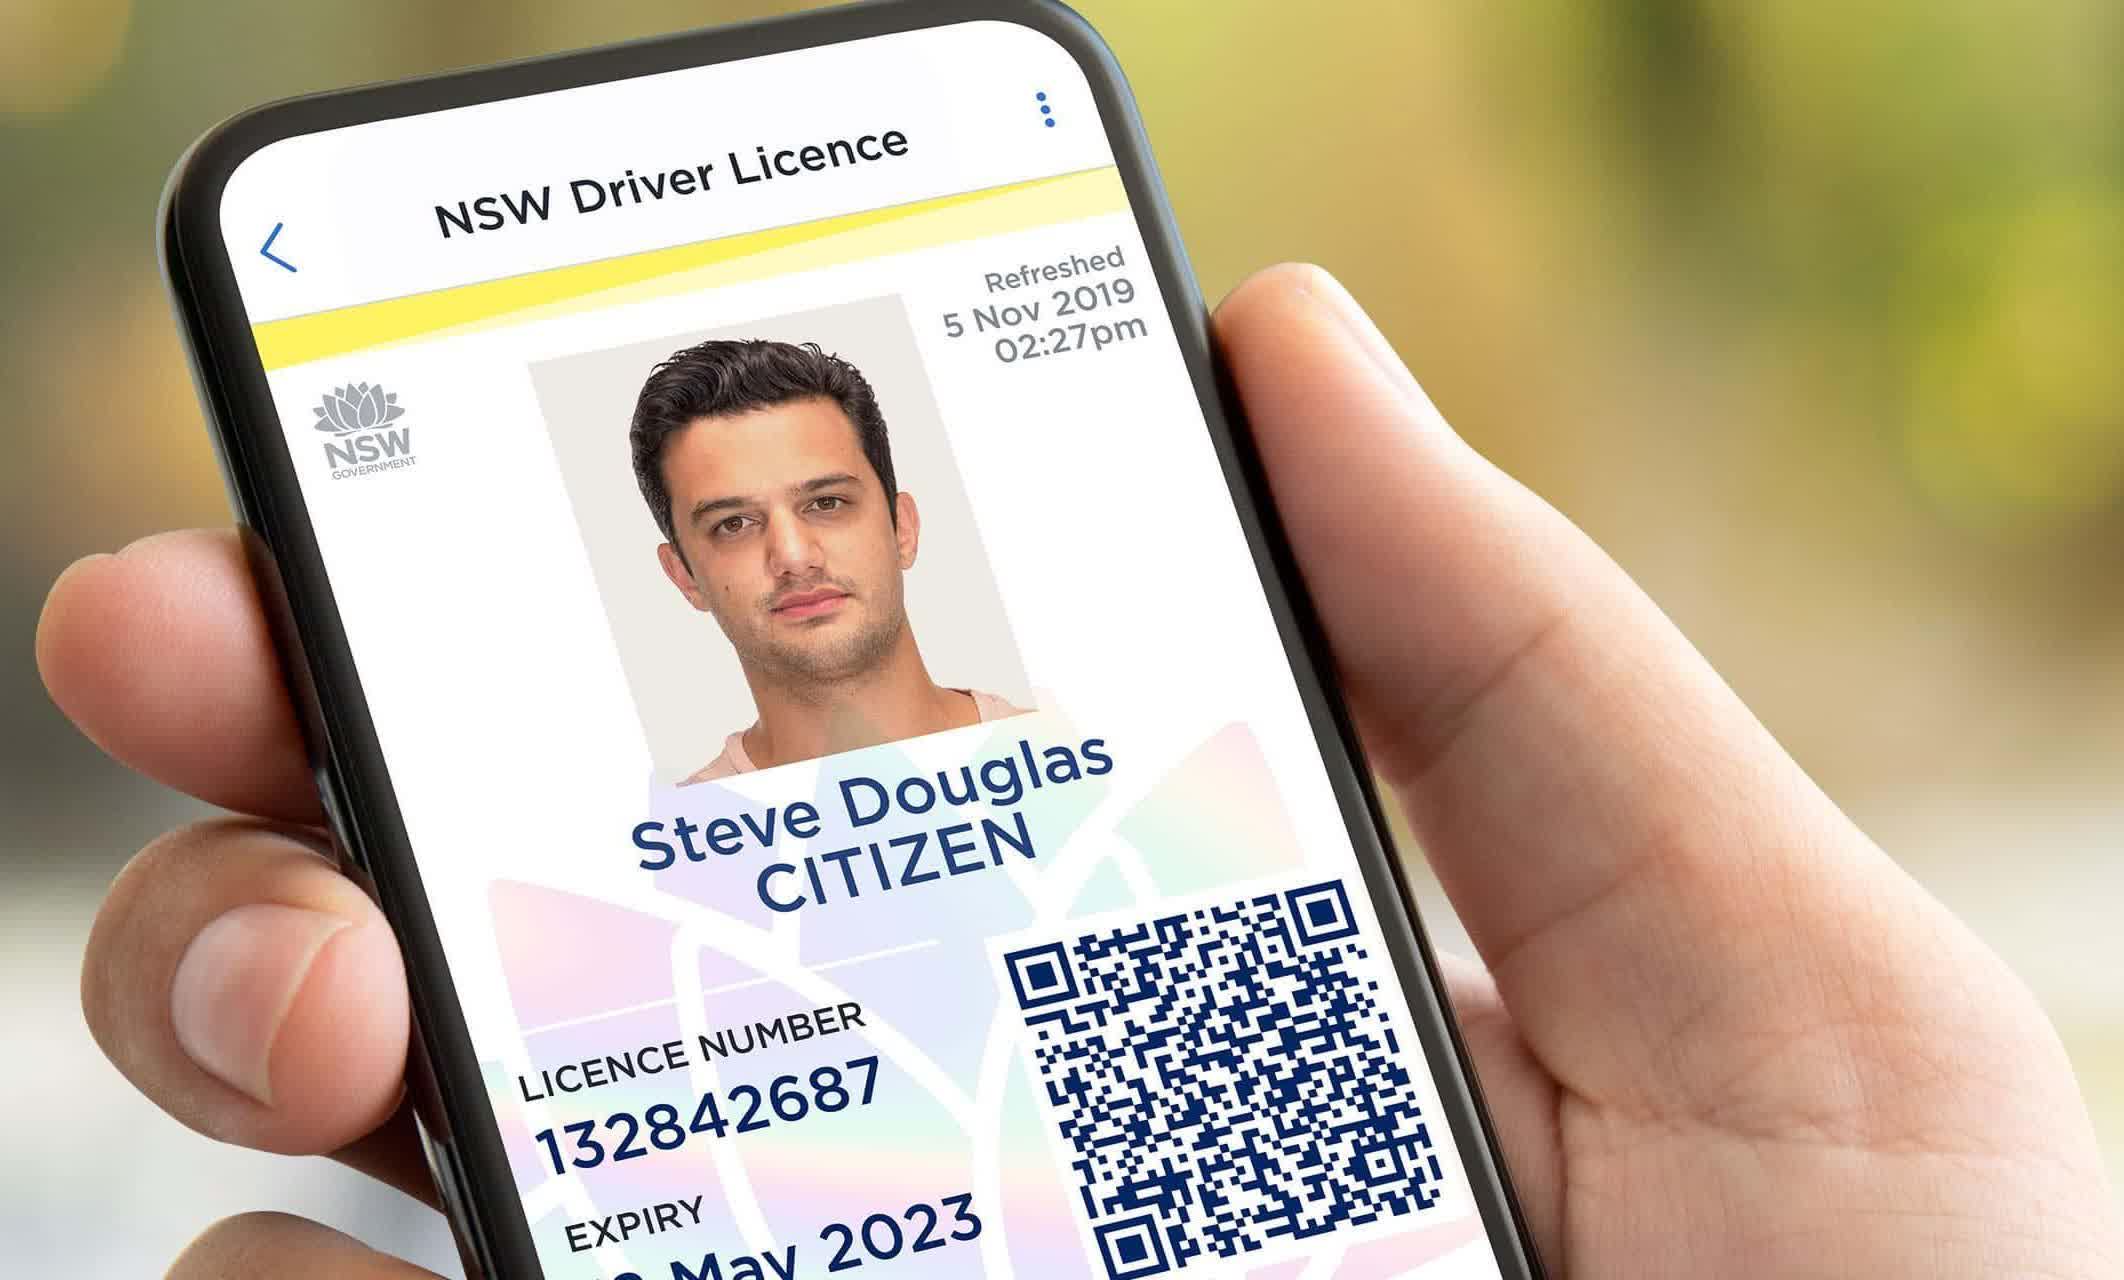 Multiple security flaws emerge in Australian digital driver's licenses